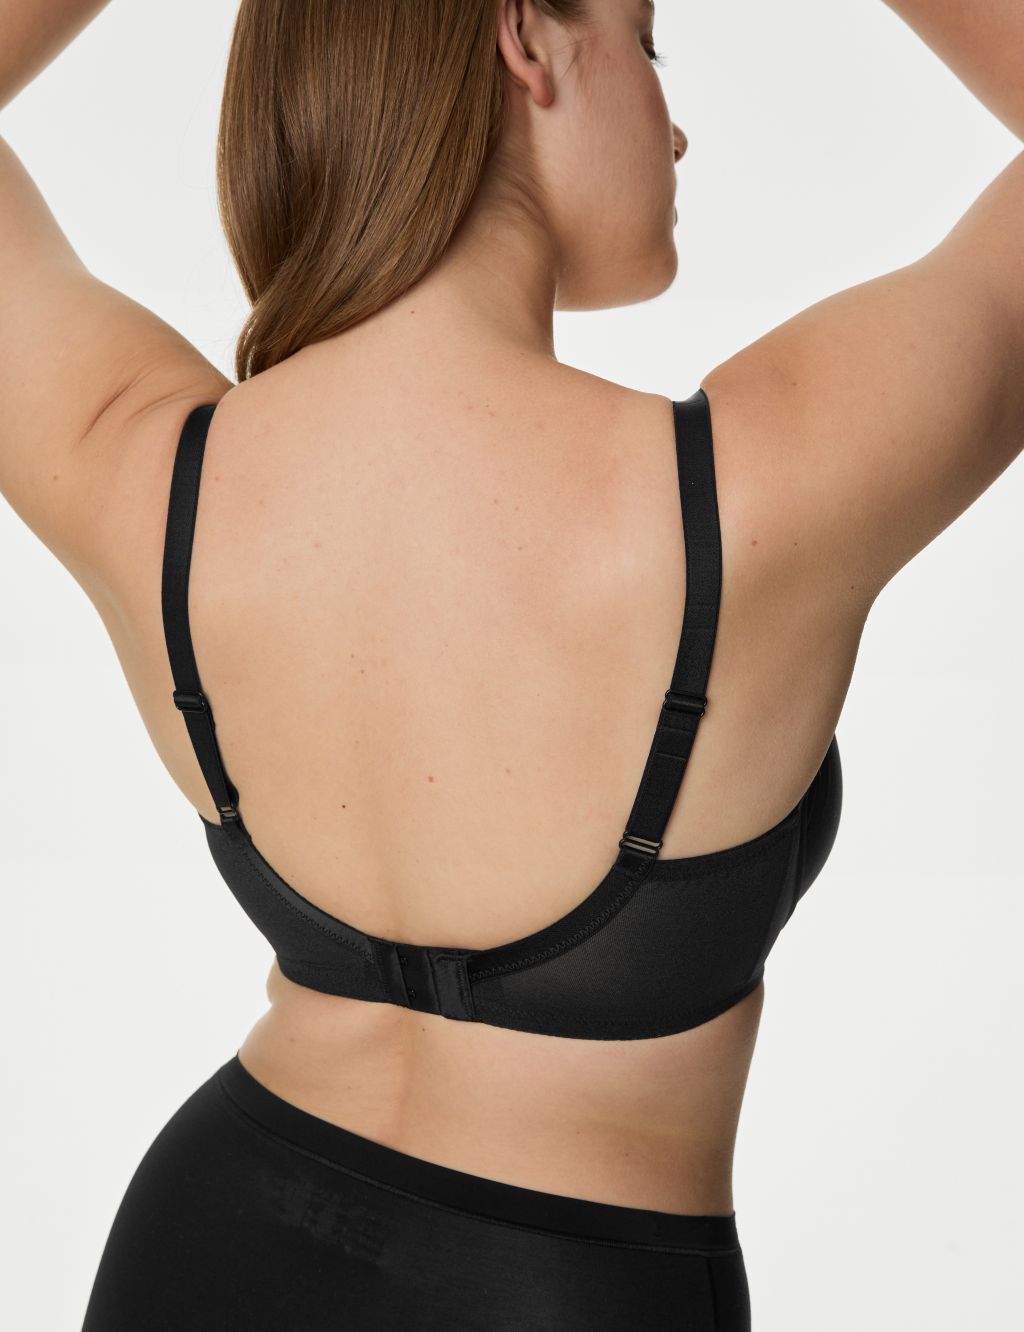 This M&S minimizer foamless brassiere is an absolute banger